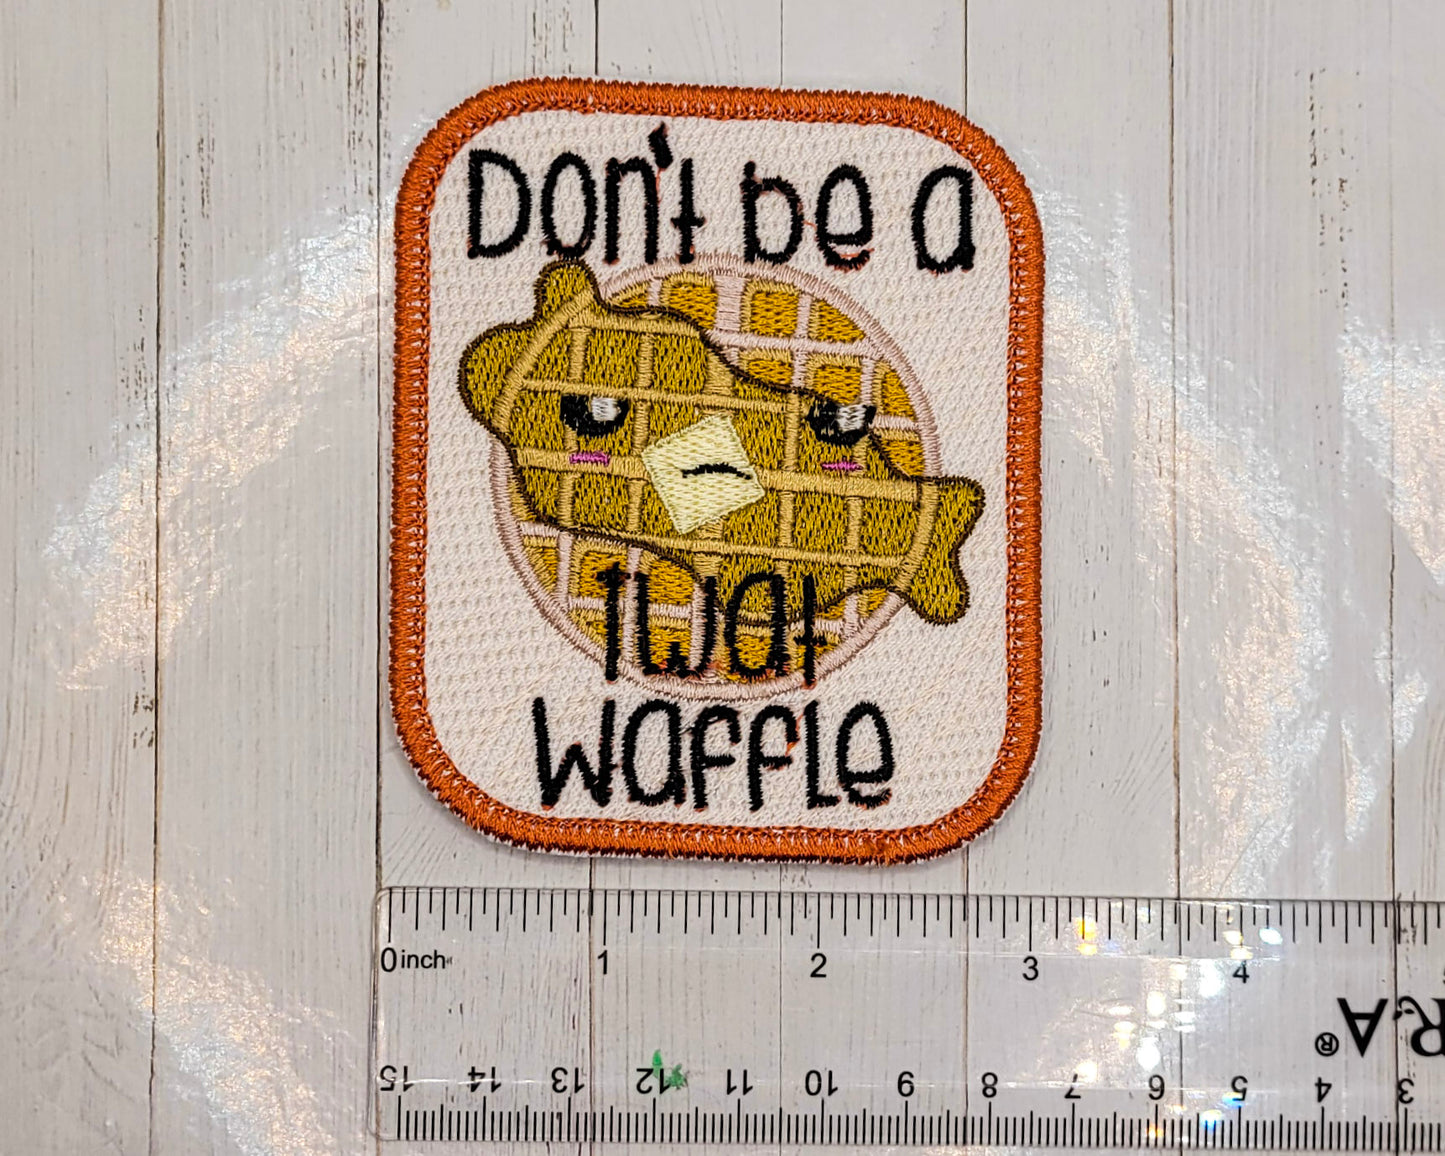 Don't be a Twat Waffle Patch